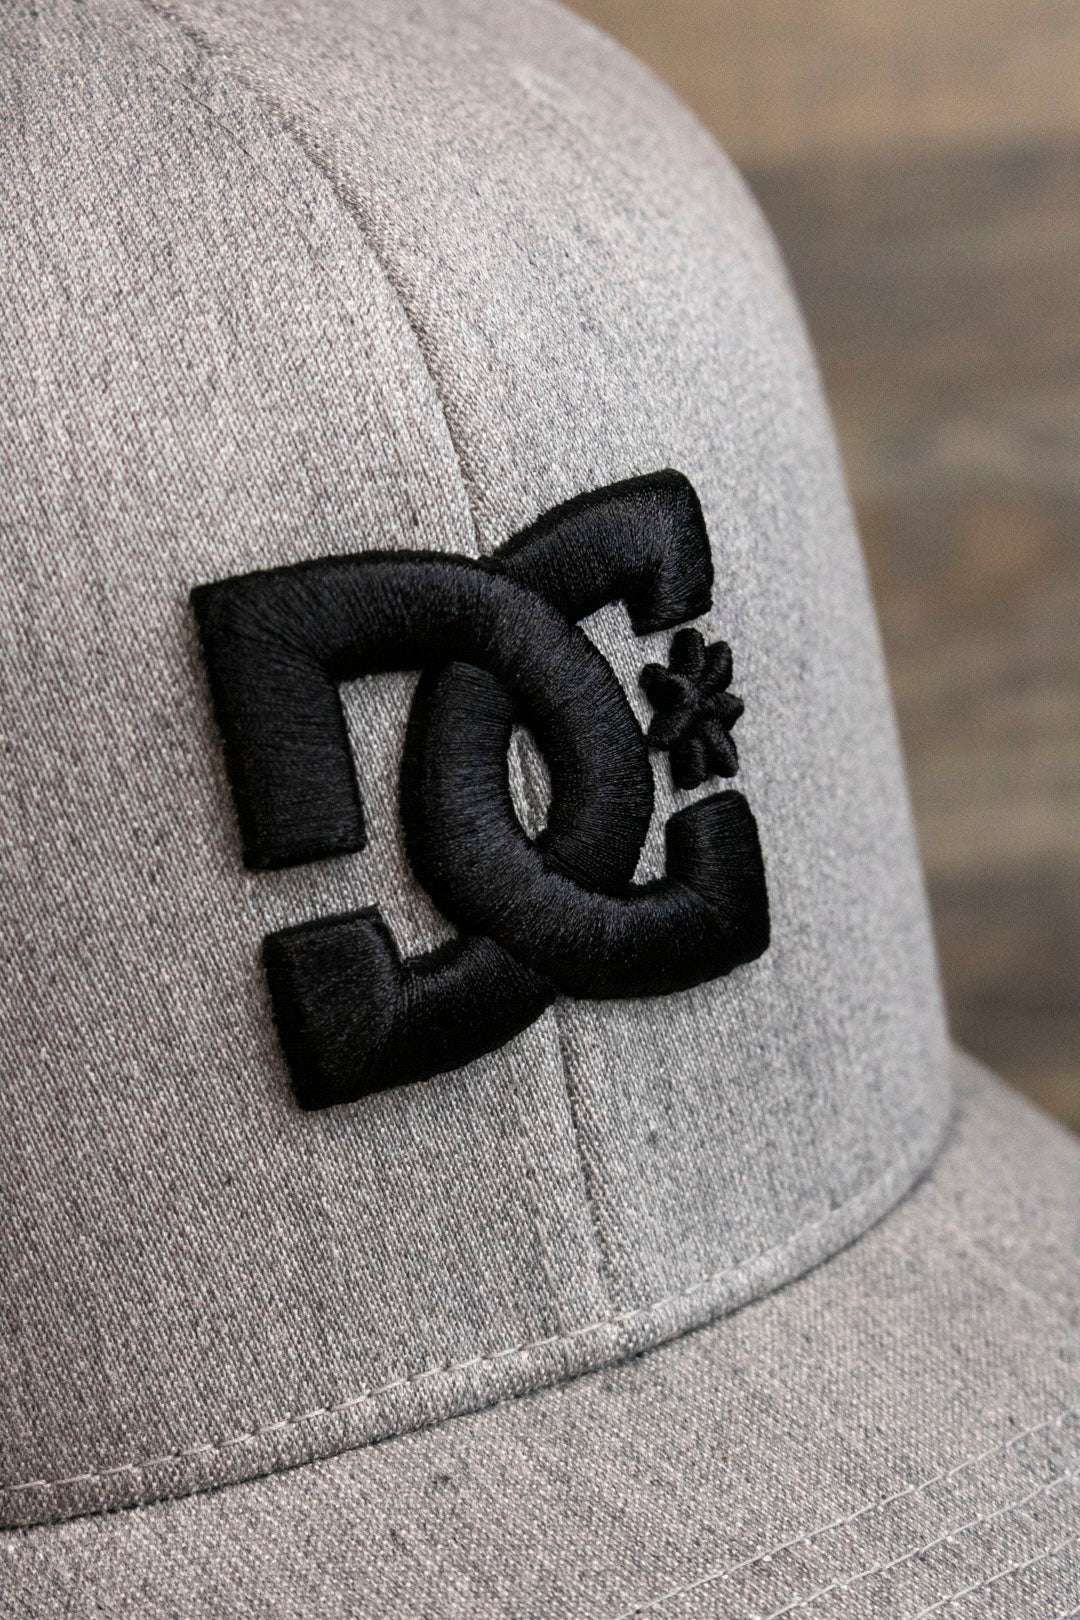 the DC logo on the Light Gray Bentbrim Skater Hat | DC Shoes Black Bottom Heather Gray Flexfit Cap is made of black puff embroidery